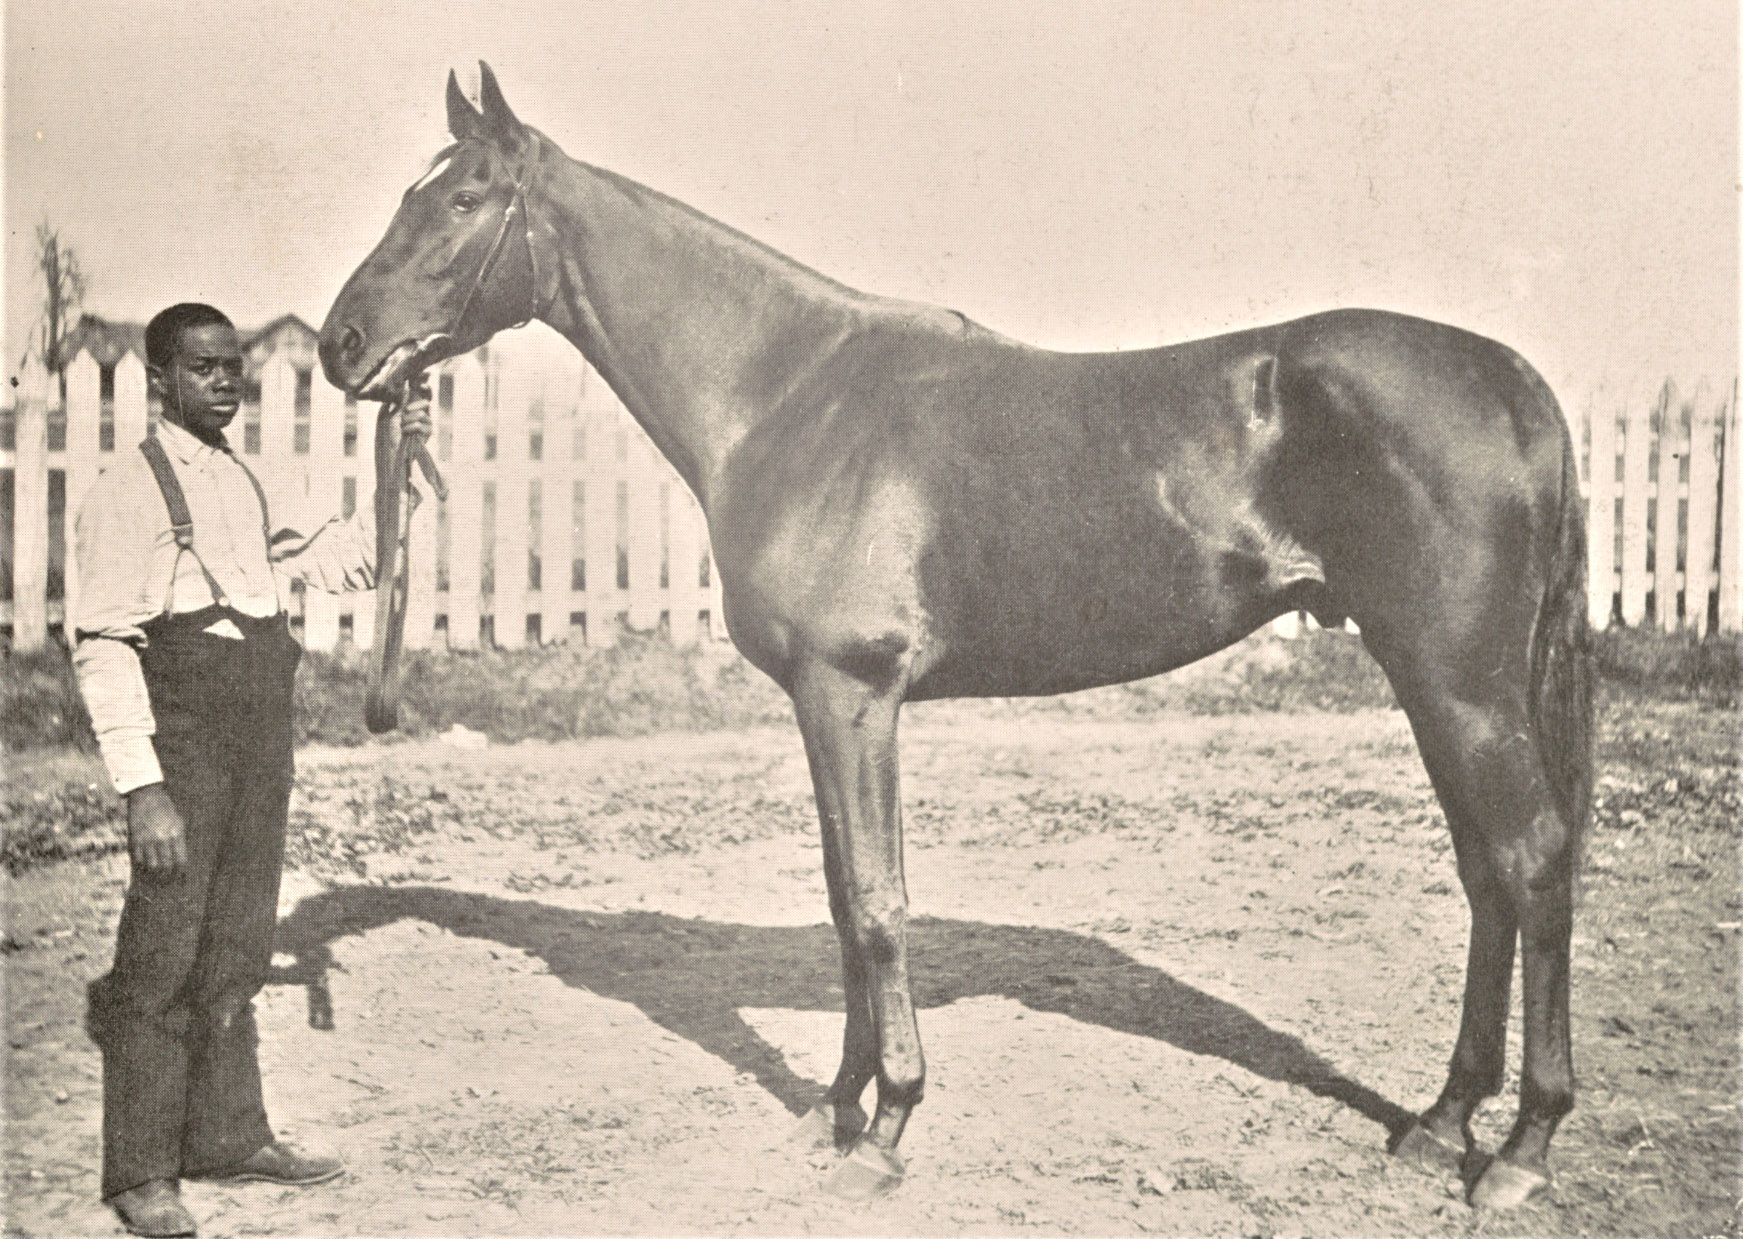 Photograph of Henry of Navarre with unindentified handler from "The American Turf" (Keeneland Library Collection)